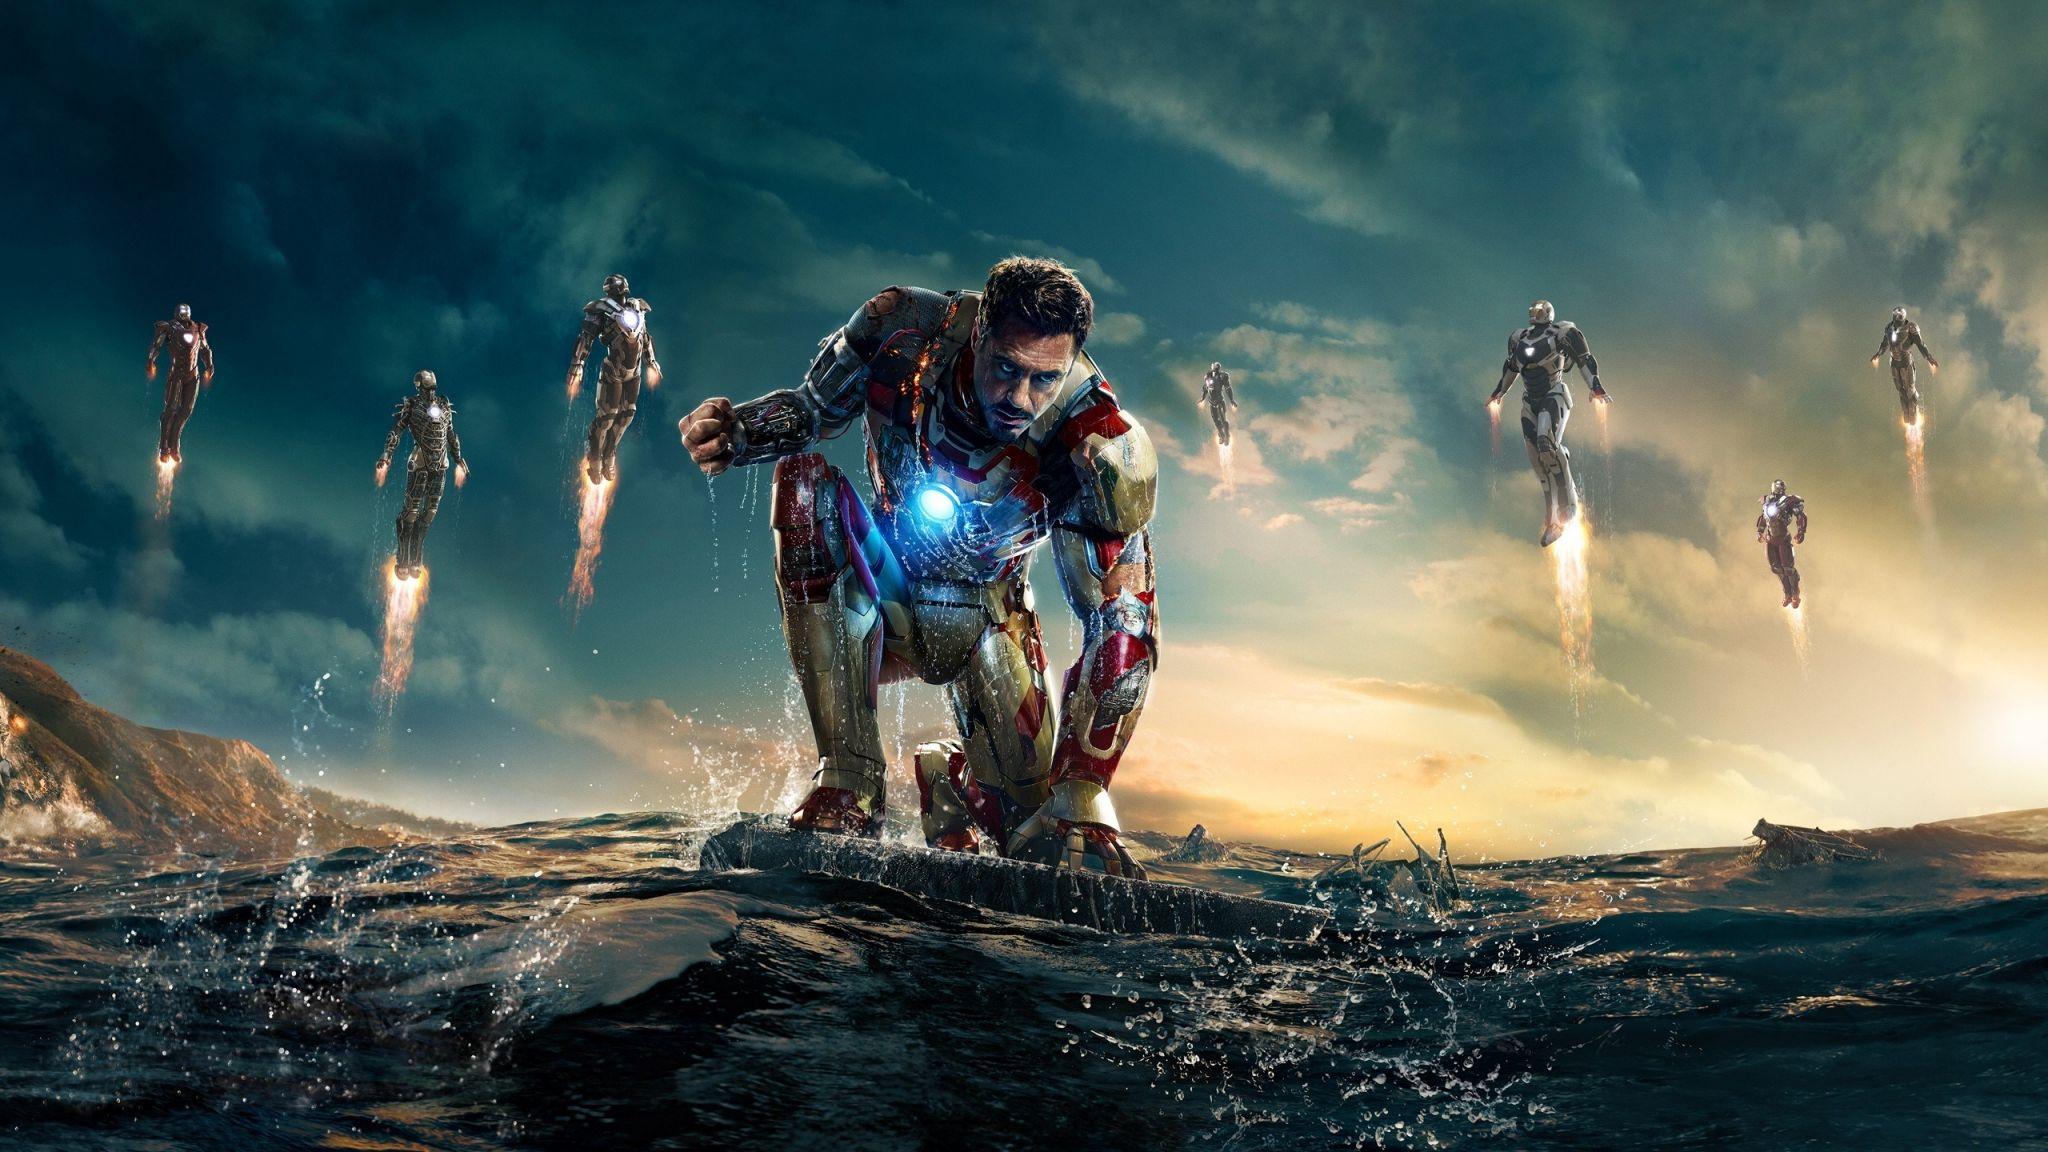 iron man background wallpaper for computer free. Iron man HD wallpaper, Iron man wallpaper, Man wallpaper